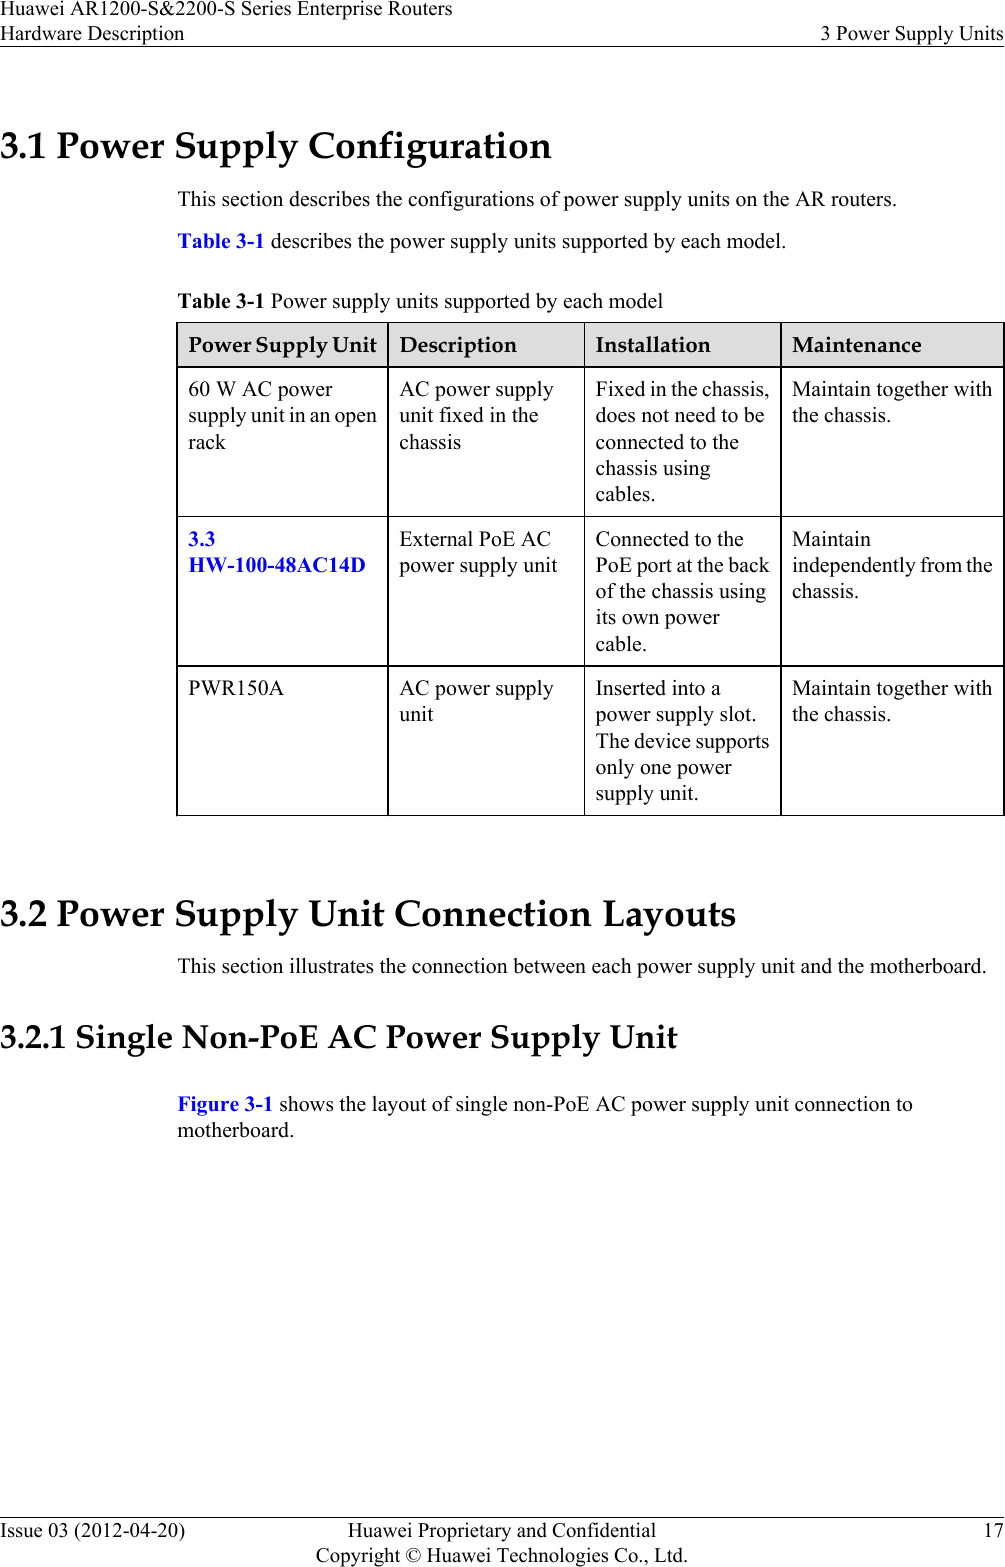 3.1 Power Supply ConfigurationThis section describes the configurations of power supply units on the AR routers.Table 3-1 describes the power supply units supported by each model.Table 3-1 Power supply units supported by each modelPower Supply Unit Description Installation Maintenance60 W AC powersupply unit in an openrackAC power supplyunit fixed in thechassisFixed in the chassis,does not need to beconnected to thechassis usingcables.Maintain together withthe chassis.3.3HW-100-48AC14DExternal PoE ACpower supply unitConnected to thePoE port at the backof the chassis usingits own powercable.Maintainindependently from thechassis.PWR150A AC power supplyunitInserted into apower supply slot.The device supportsonly one powersupply unit.Maintain together withthe chassis. 3.2 Power Supply Unit Connection LayoutsThis section illustrates the connection between each power supply unit and the motherboard.3.2.1 Single Non-PoE AC Power Supply UnitFigure 3-1 shows the layout of single non-PoE AC power supply unit connection tomotherboard.Huawei AR1200-S&amp;2200-S Series Enterprise RoutersHardware Description 3 Power Supply UnitsIssue 03 (2012-04-20) Huawei Proprietary and ConfidentialCopyright © Huawei Technologies Co., Ltd.17